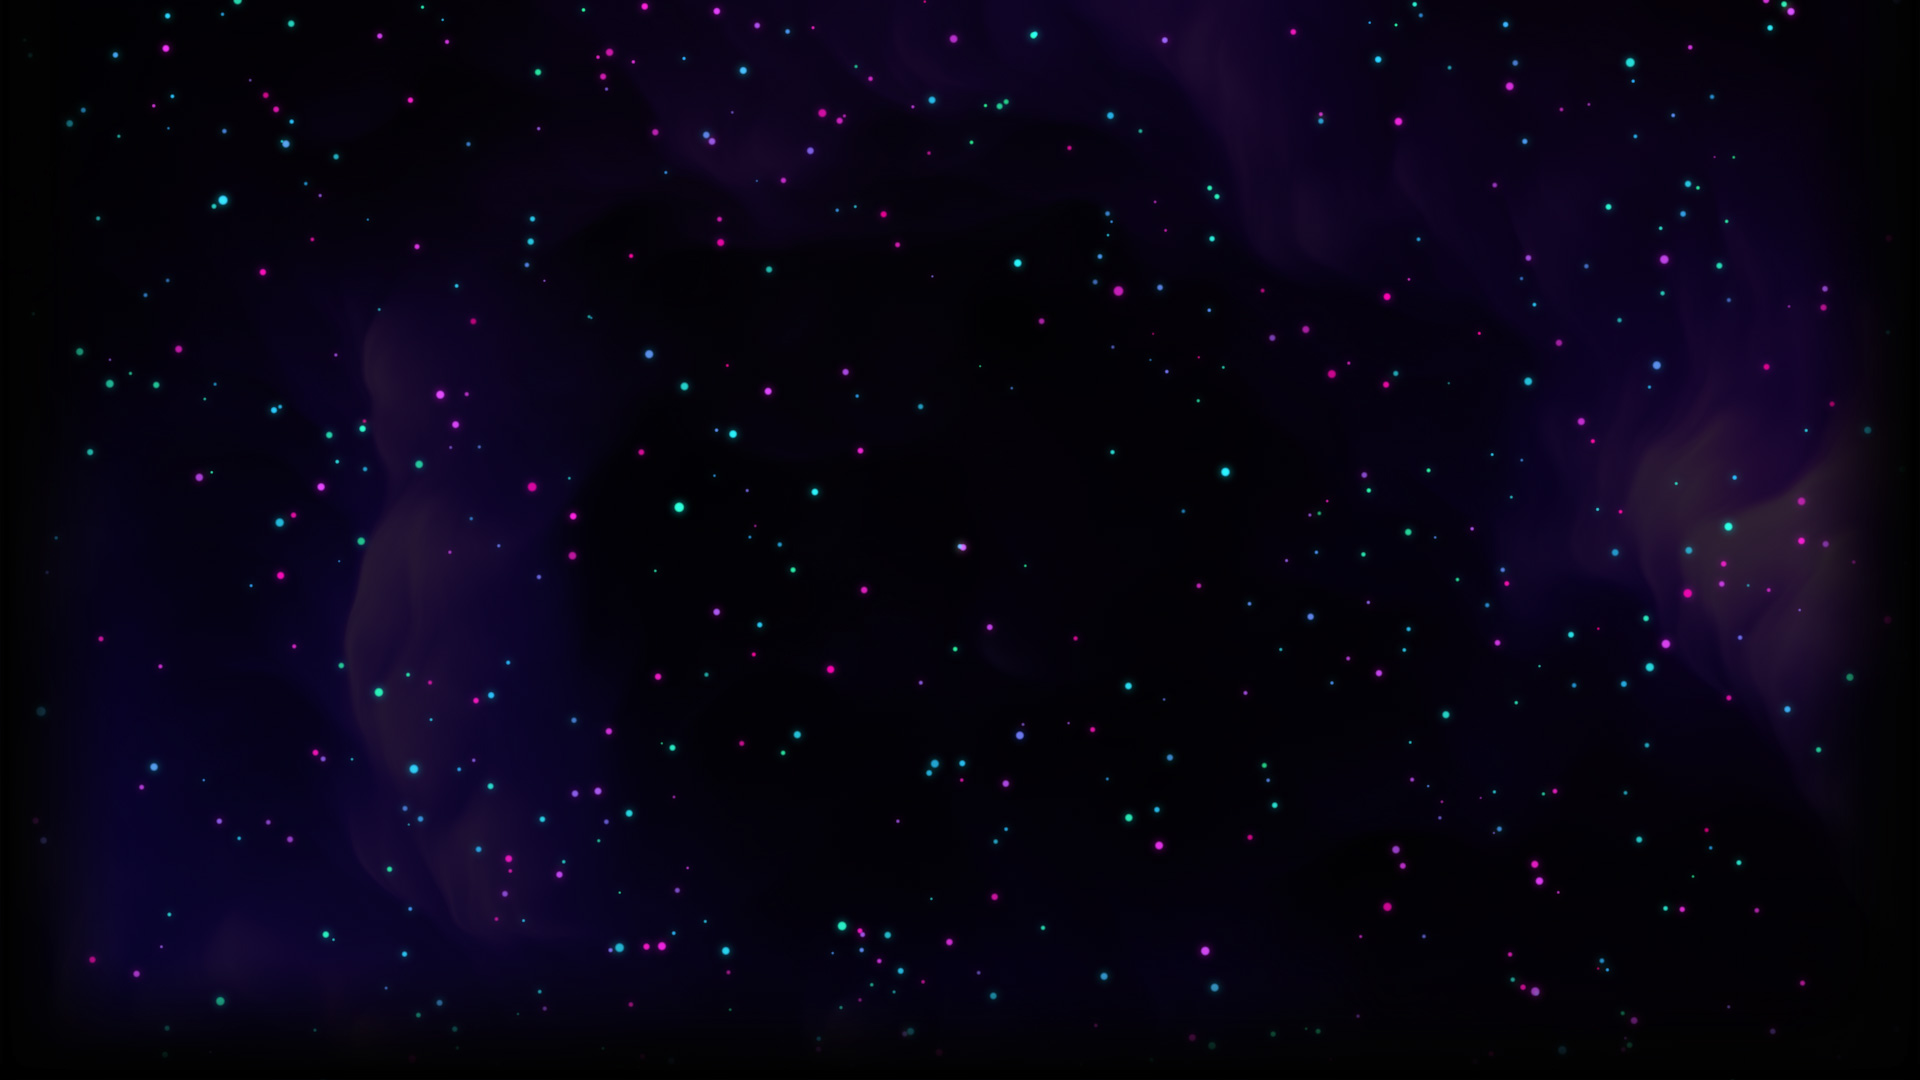 Neon Steam Background Animated Download link in description (Video & Gif )  👇